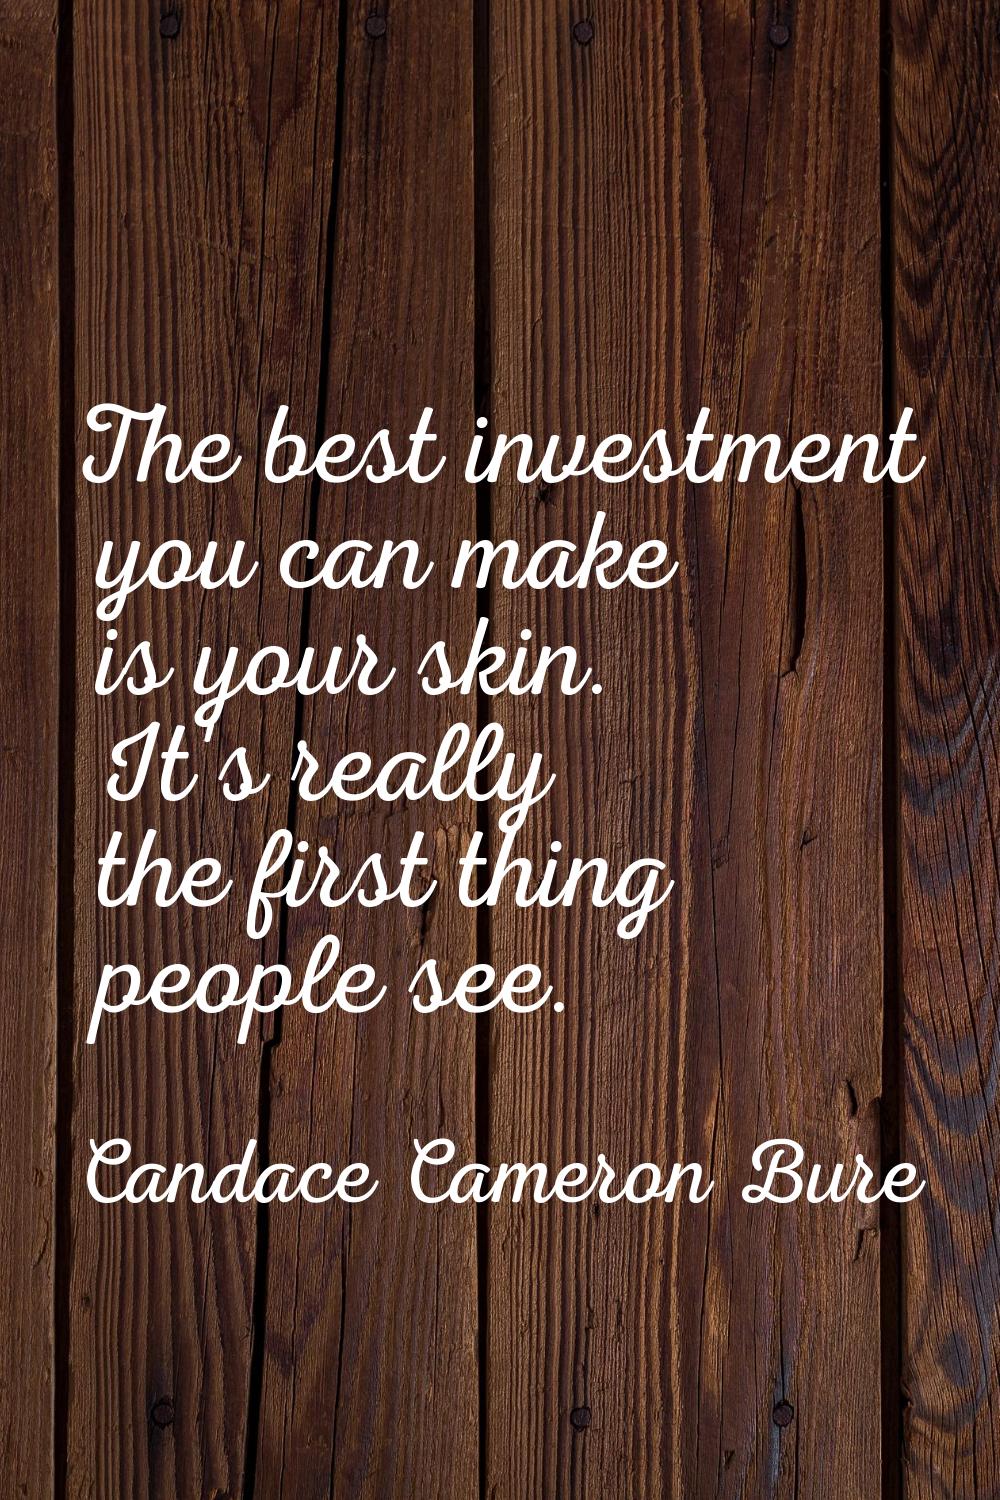 The best investment you can make is your skin. It's really the first thing people see.